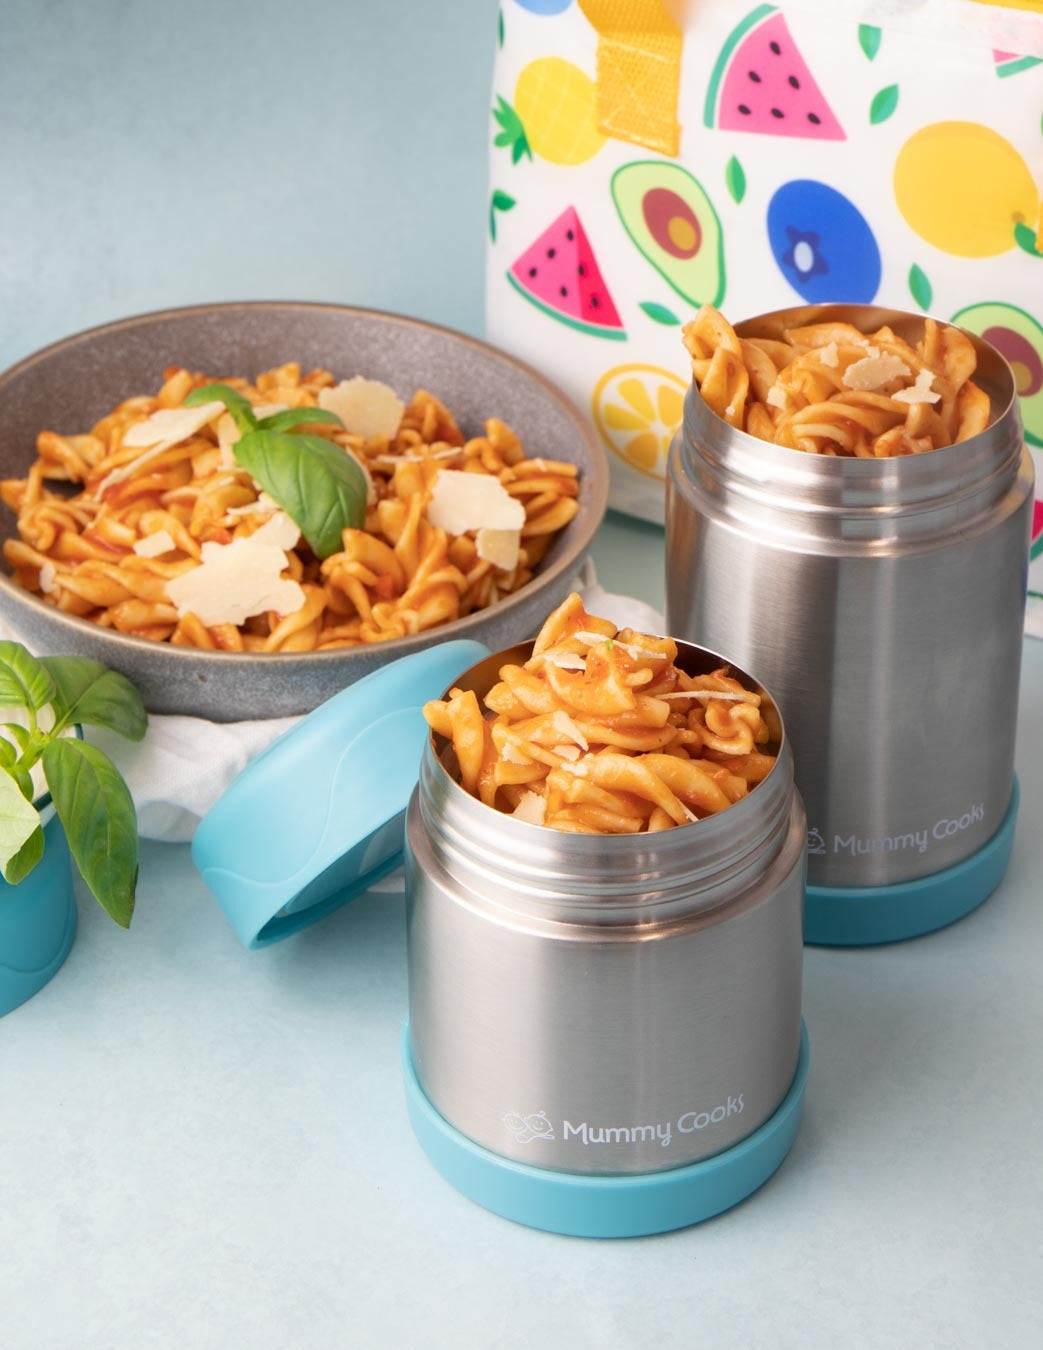 ### Elevate Your Cooking Game with Delectable Pasta and Creamy Mascarpone Creations